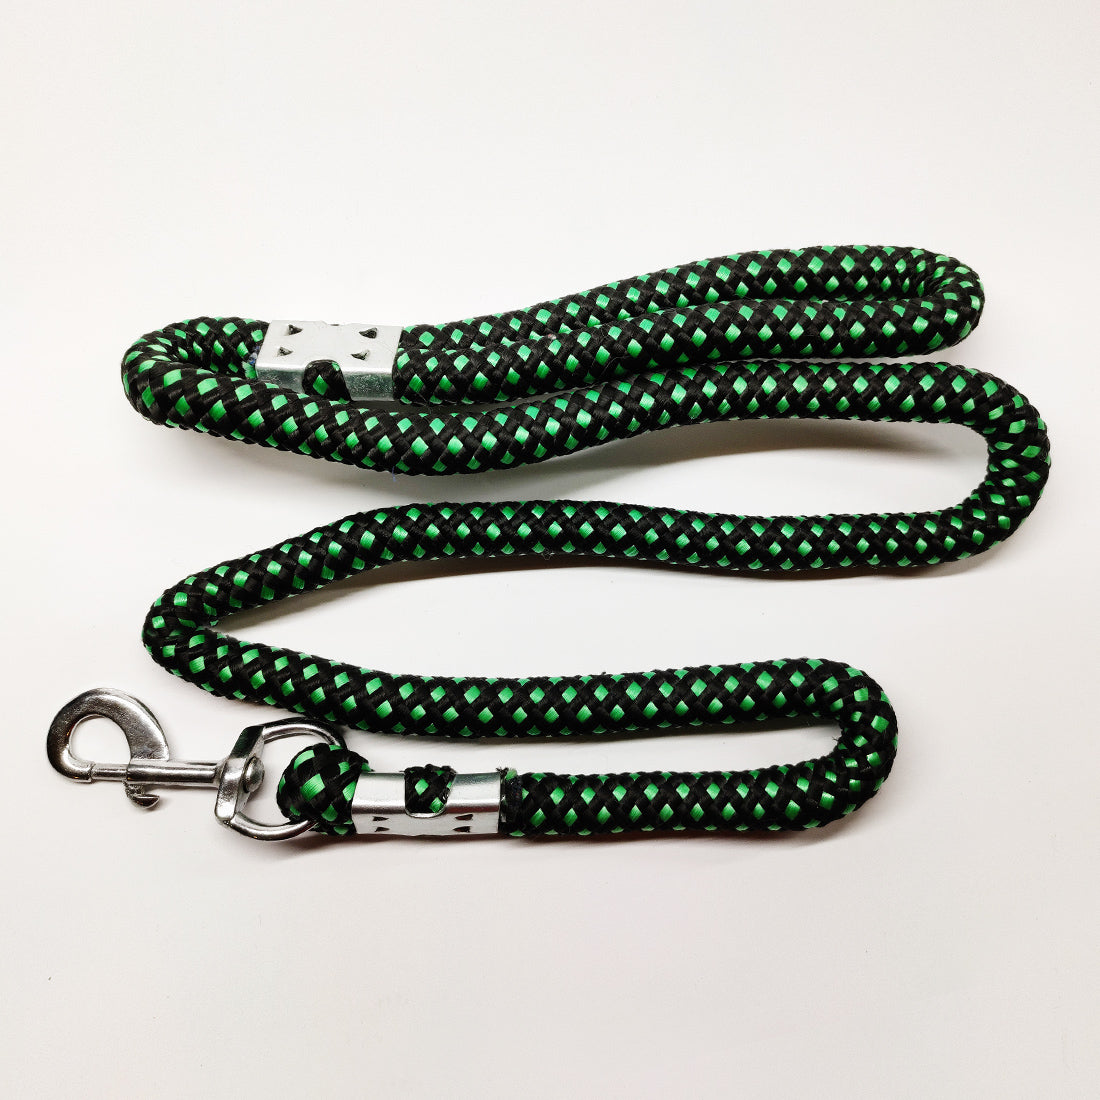 Premium Quality Rope Leash for Dogs 18MM